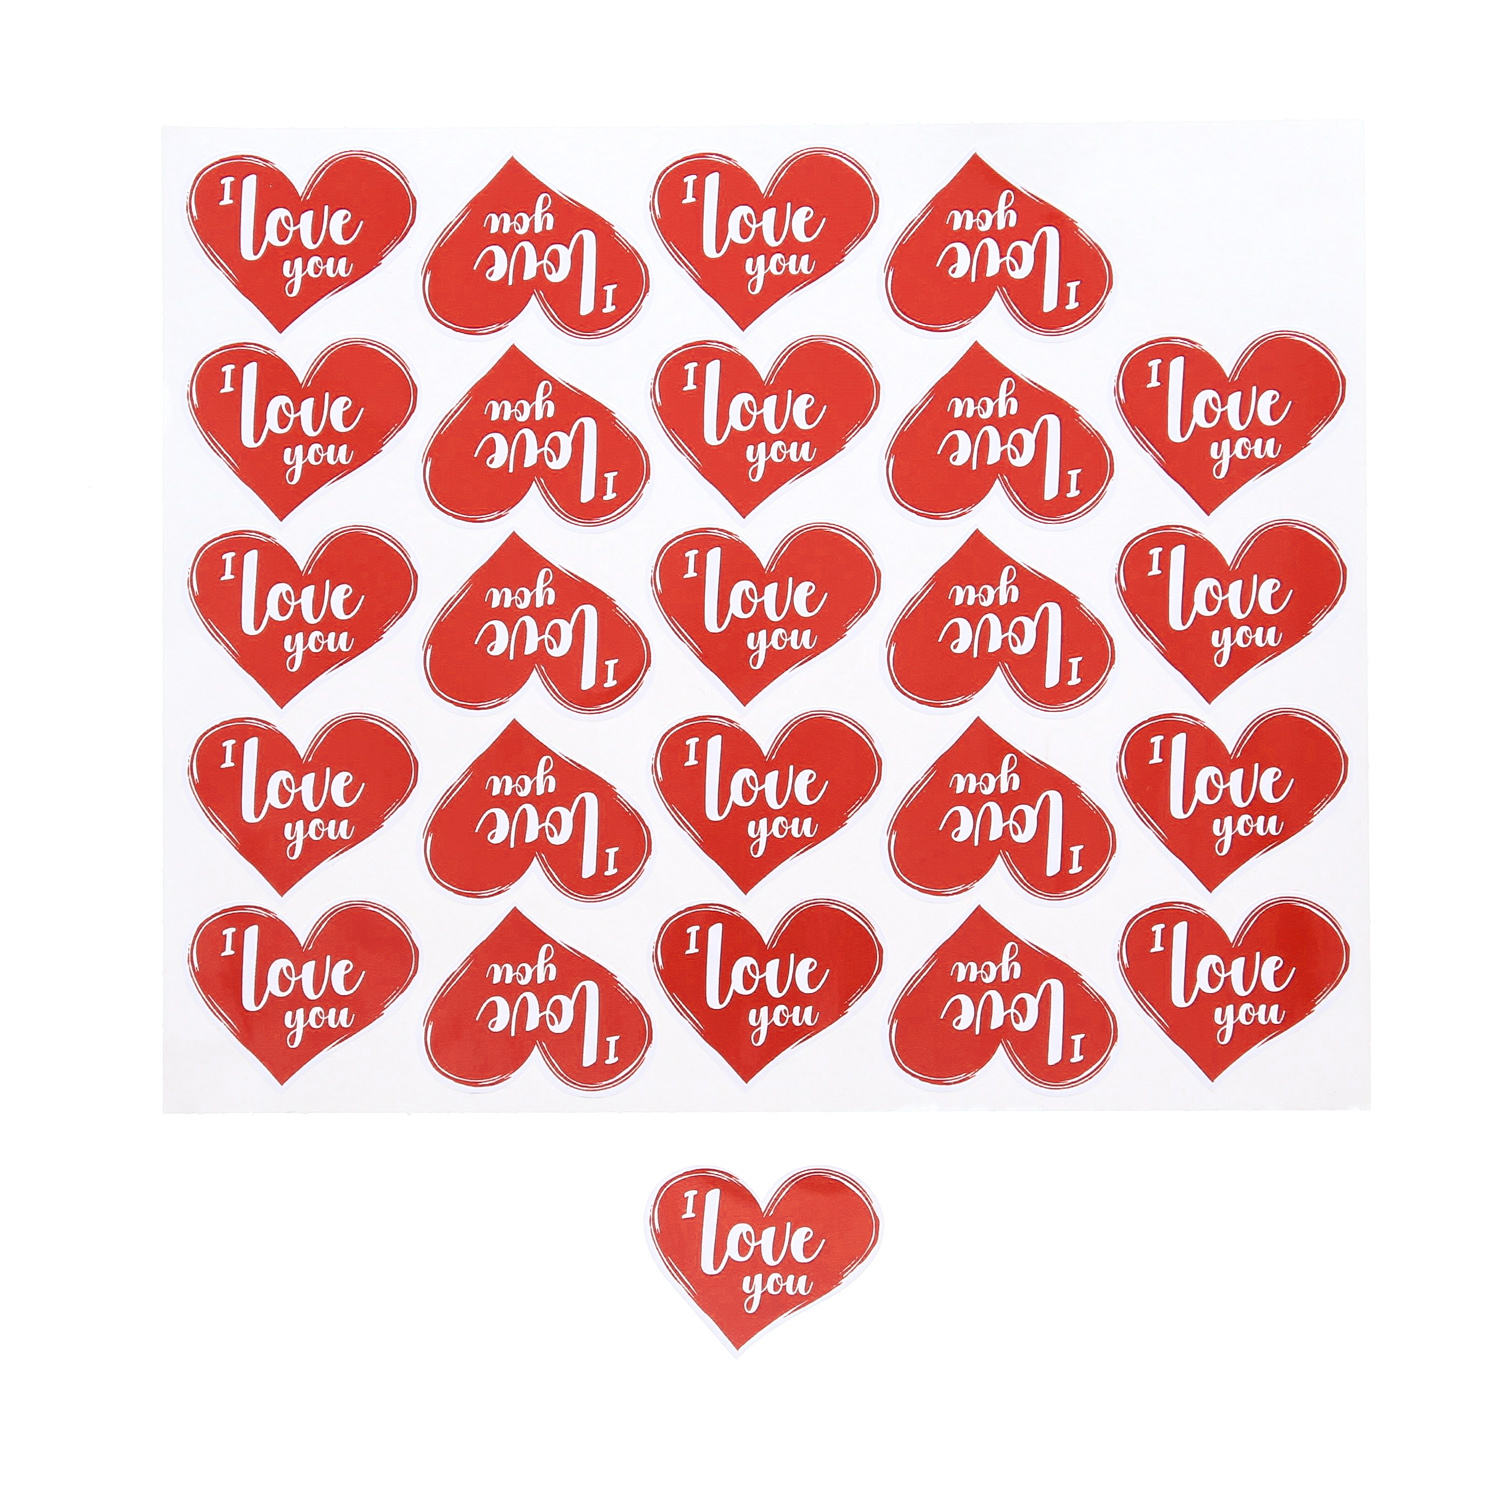 Shiny sticker "Tingy" heart-shaped with text I Love you - 125 pieces